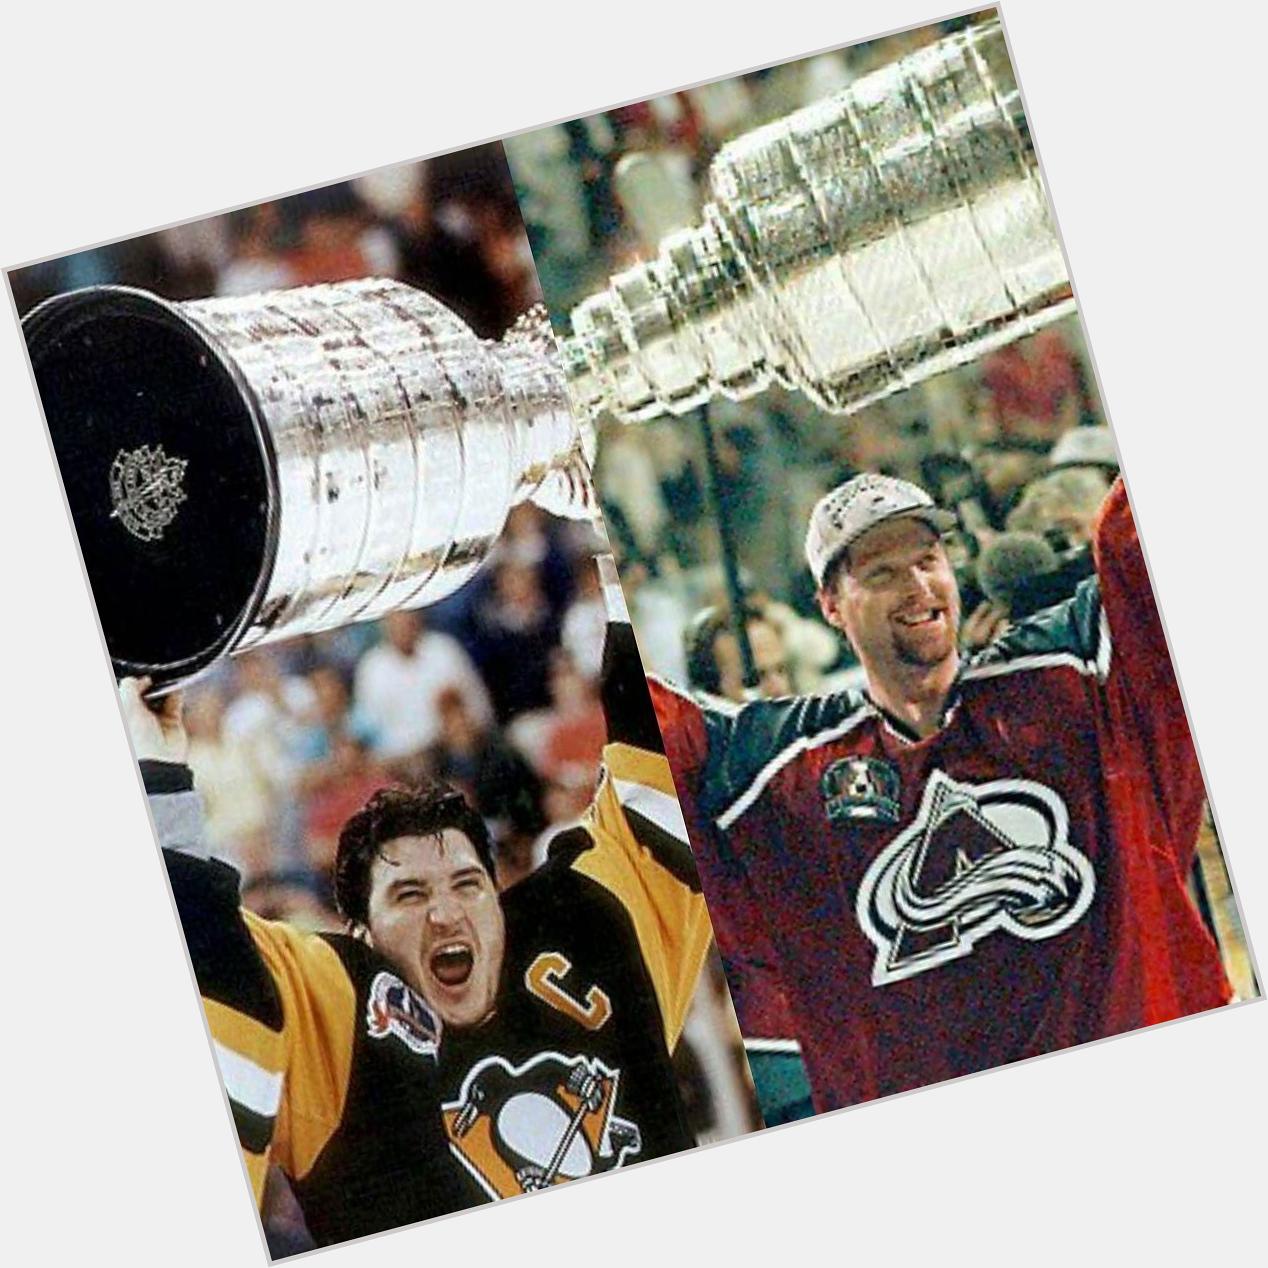 A very happy birthday to two hockey legends and Stanley Cup champions:  Mario Lemieux (L) 